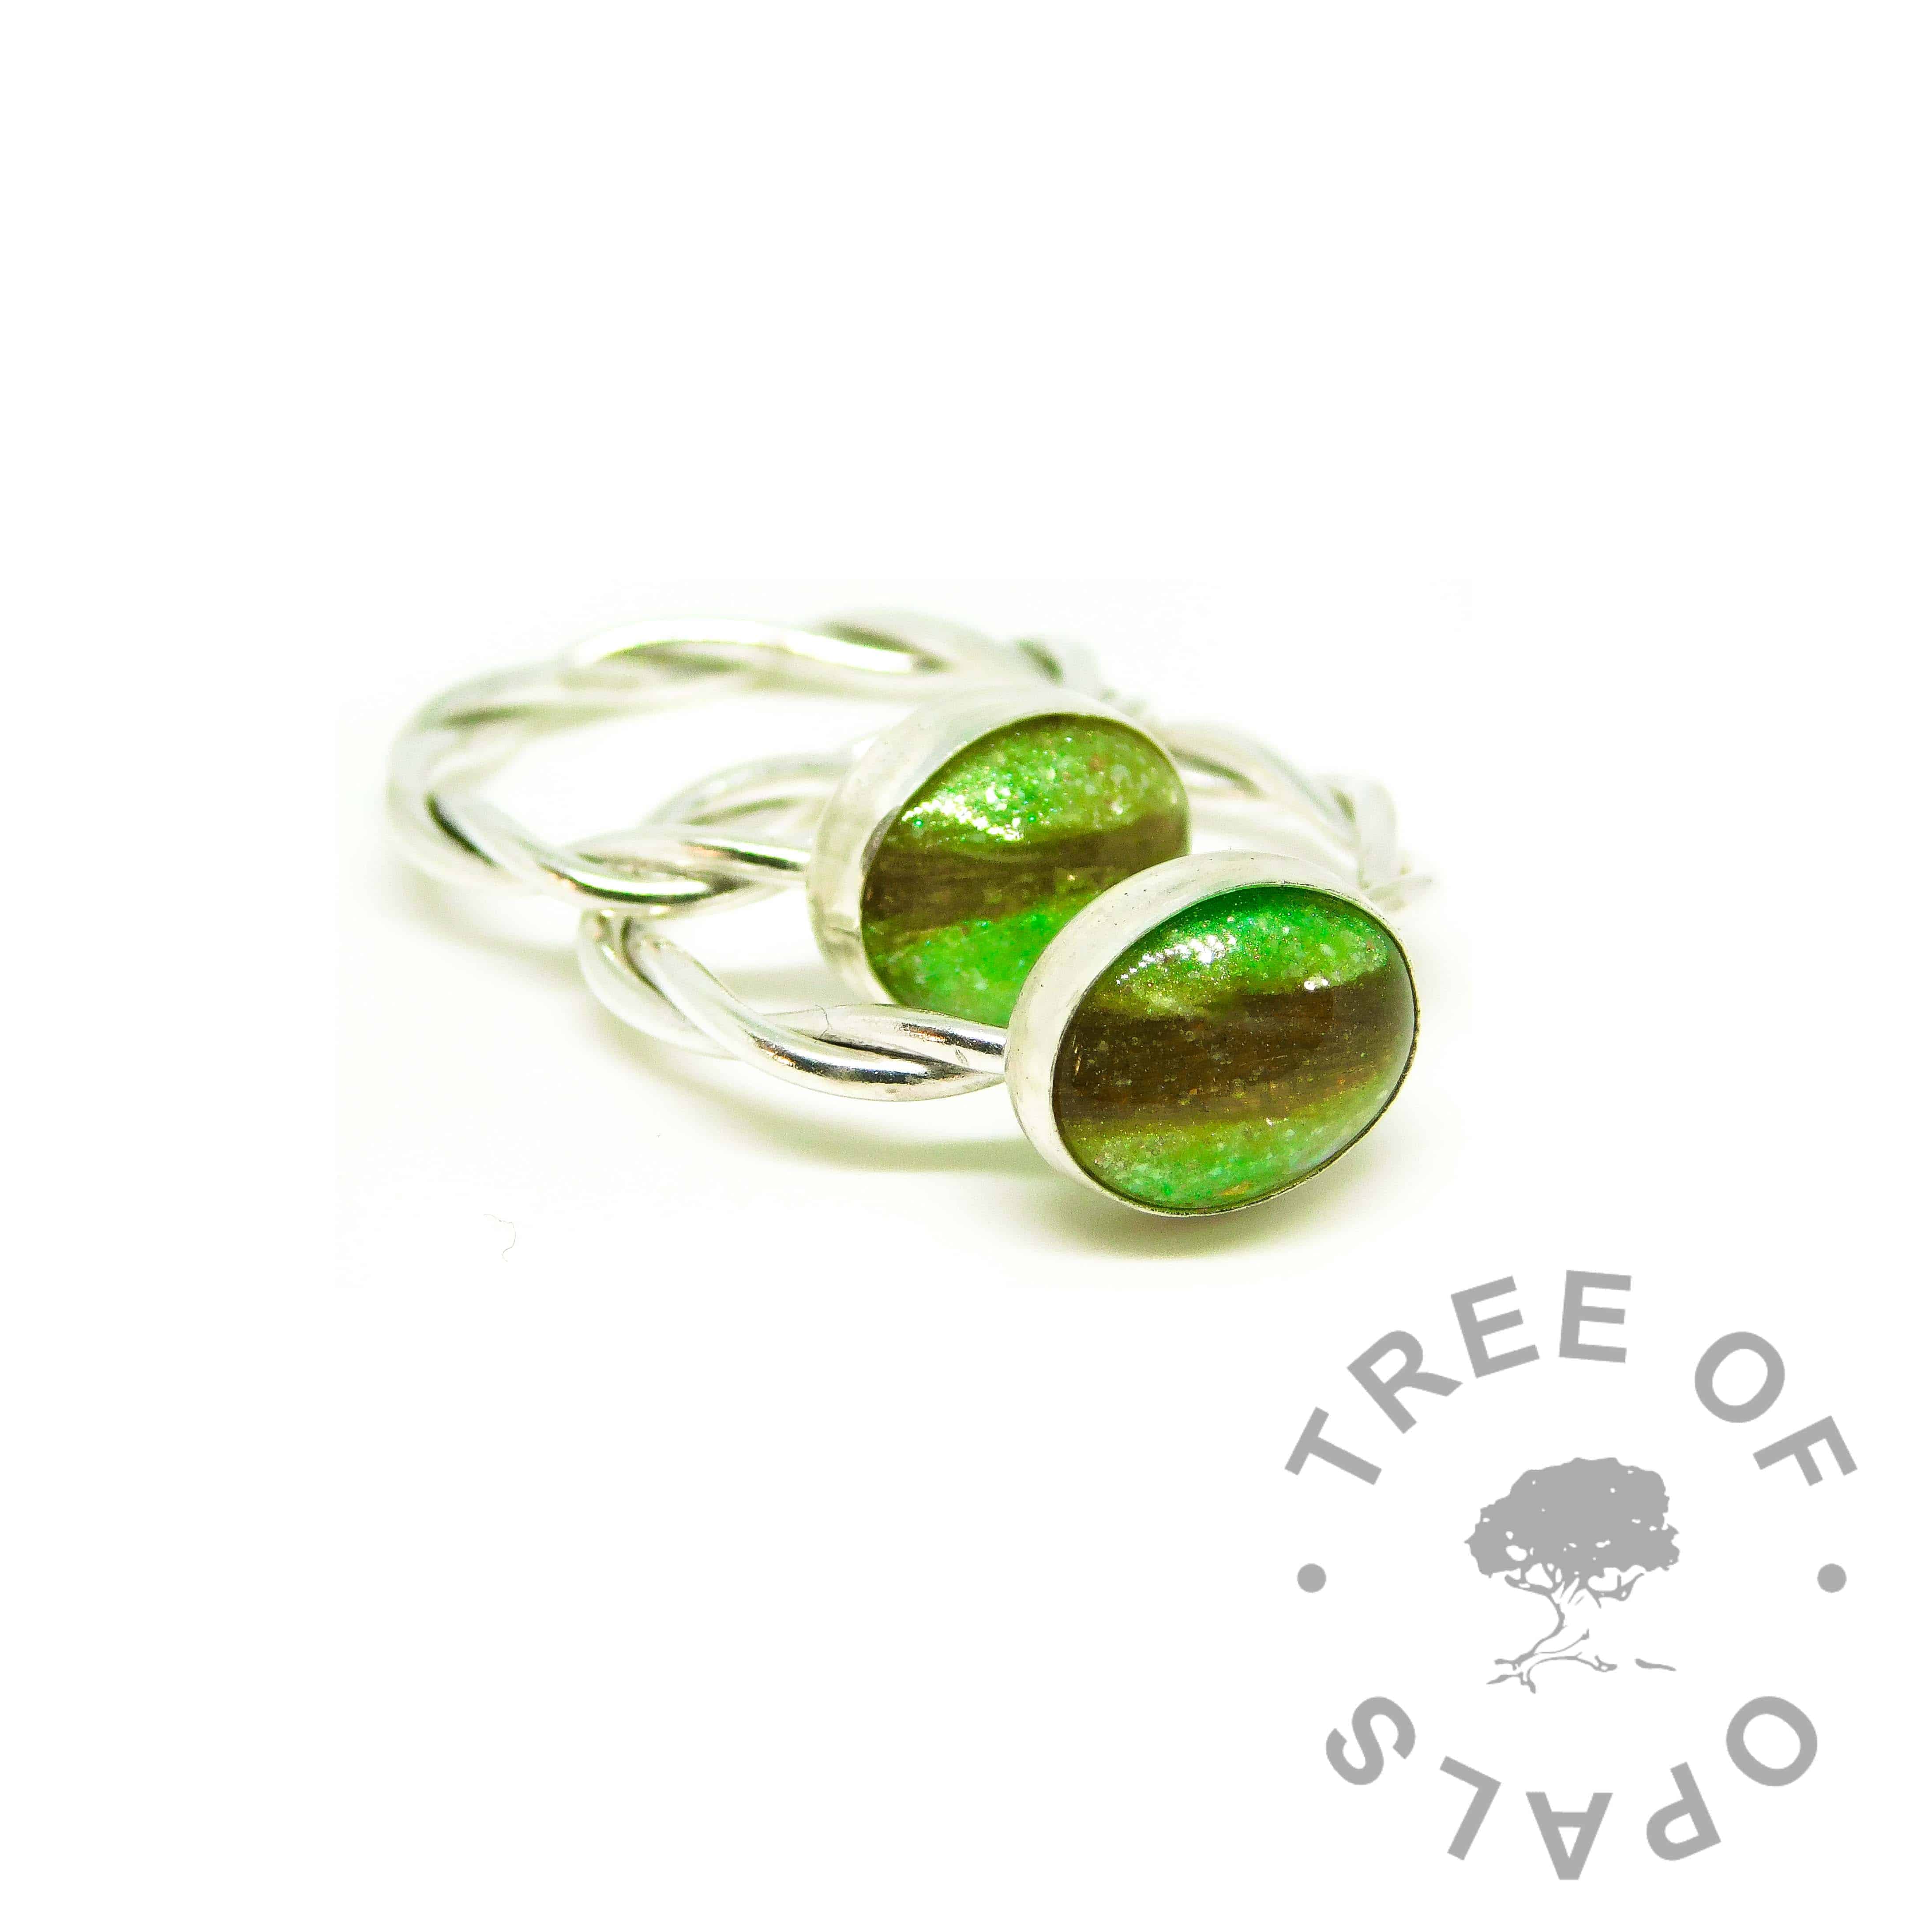 green hair ring duo, basilisk green resin sparkle mix, twisted wire Argentium silver bands